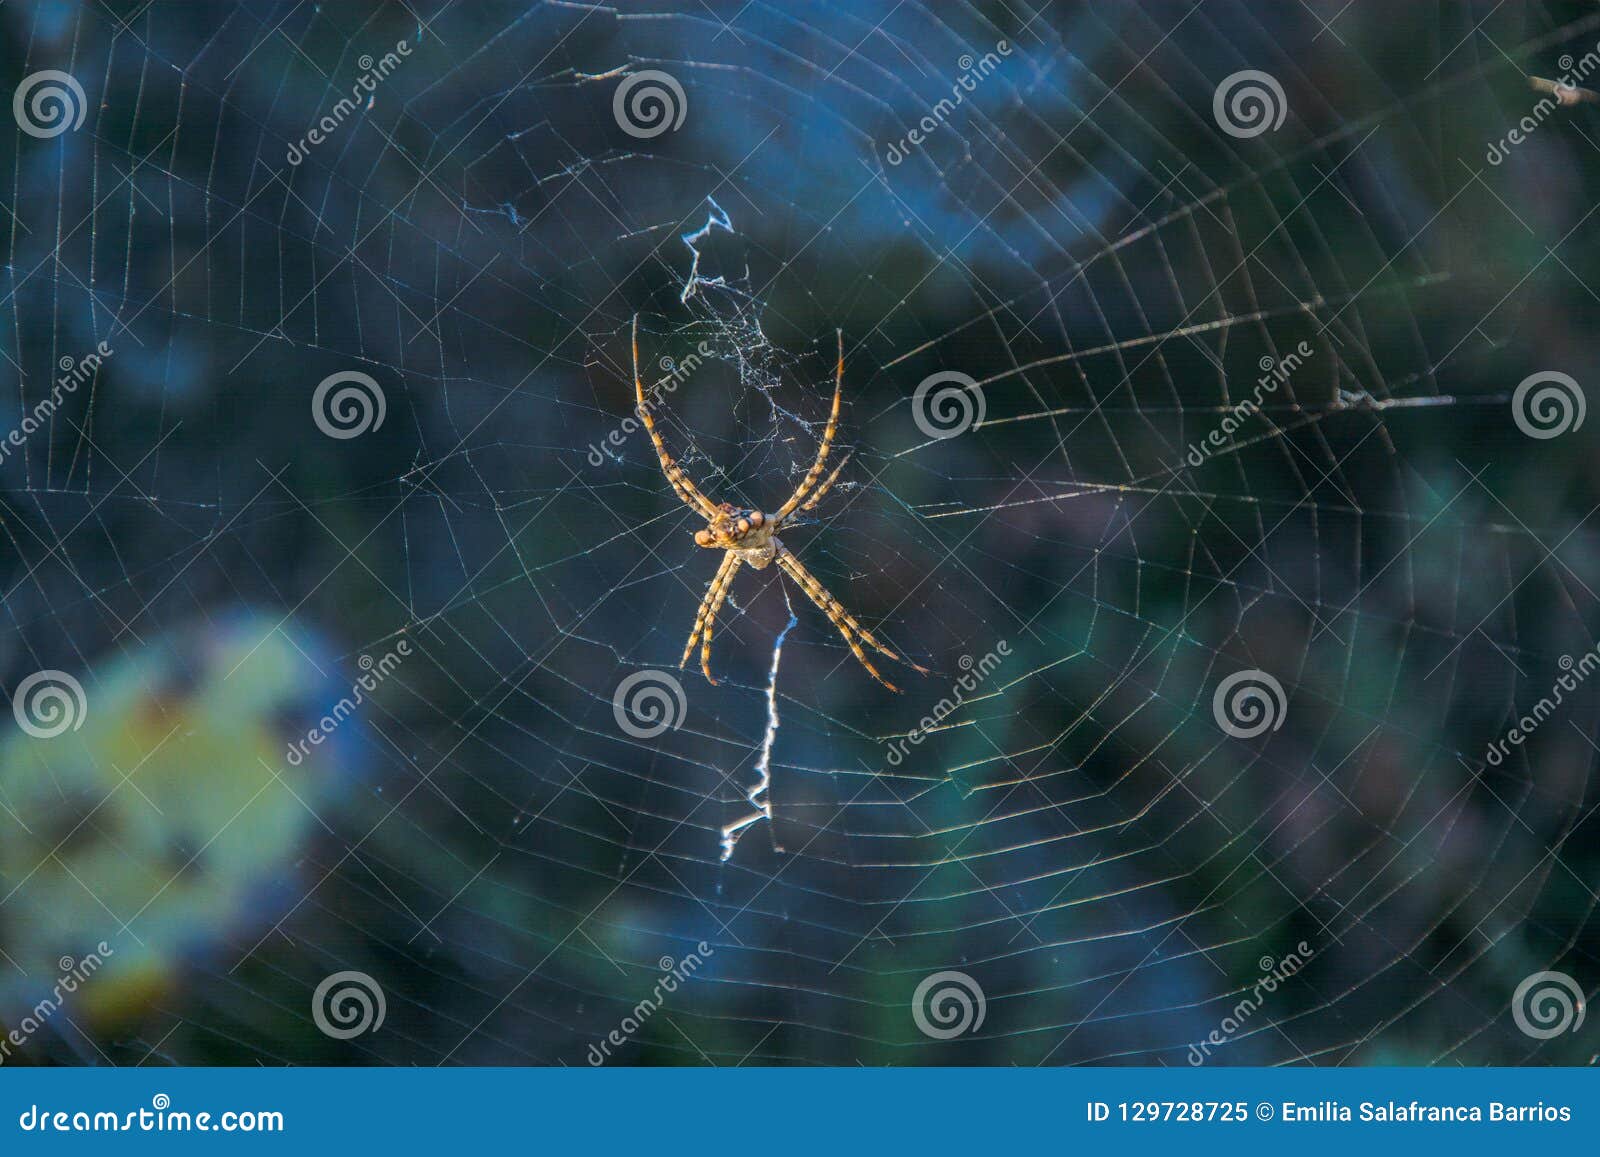 spider in southern spain